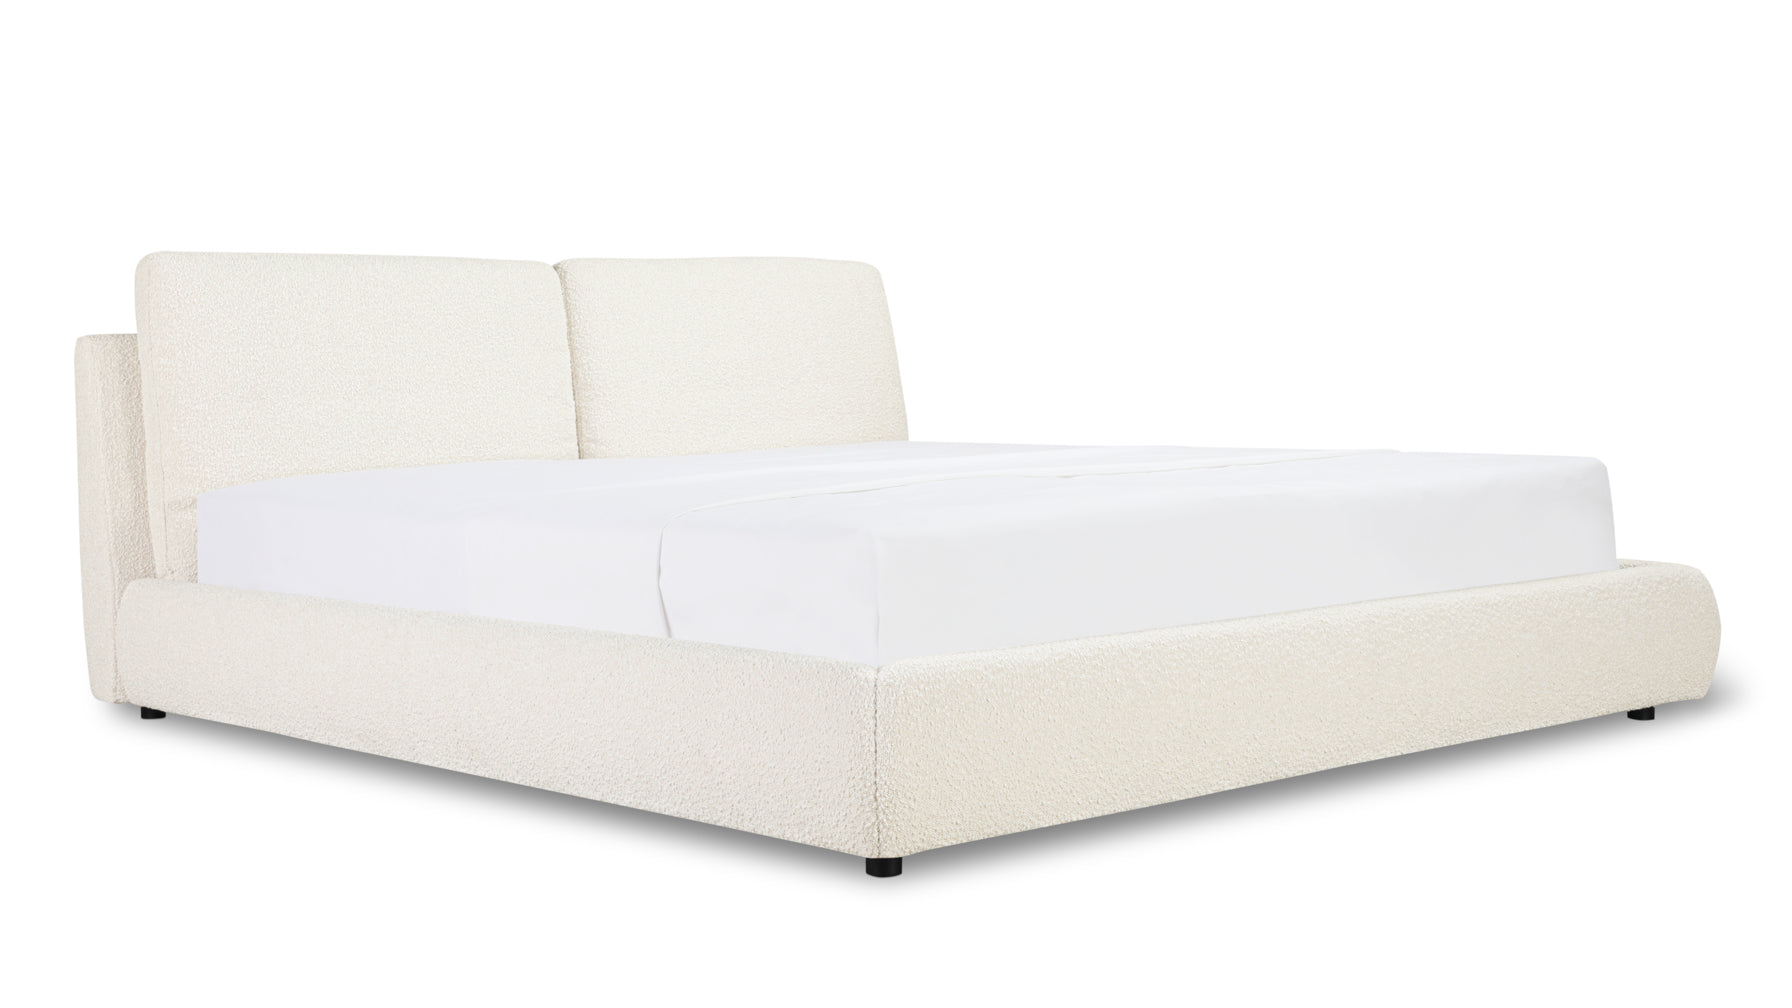 Cloud Bed with Storage, Queen, Cream Boucle - Image 6